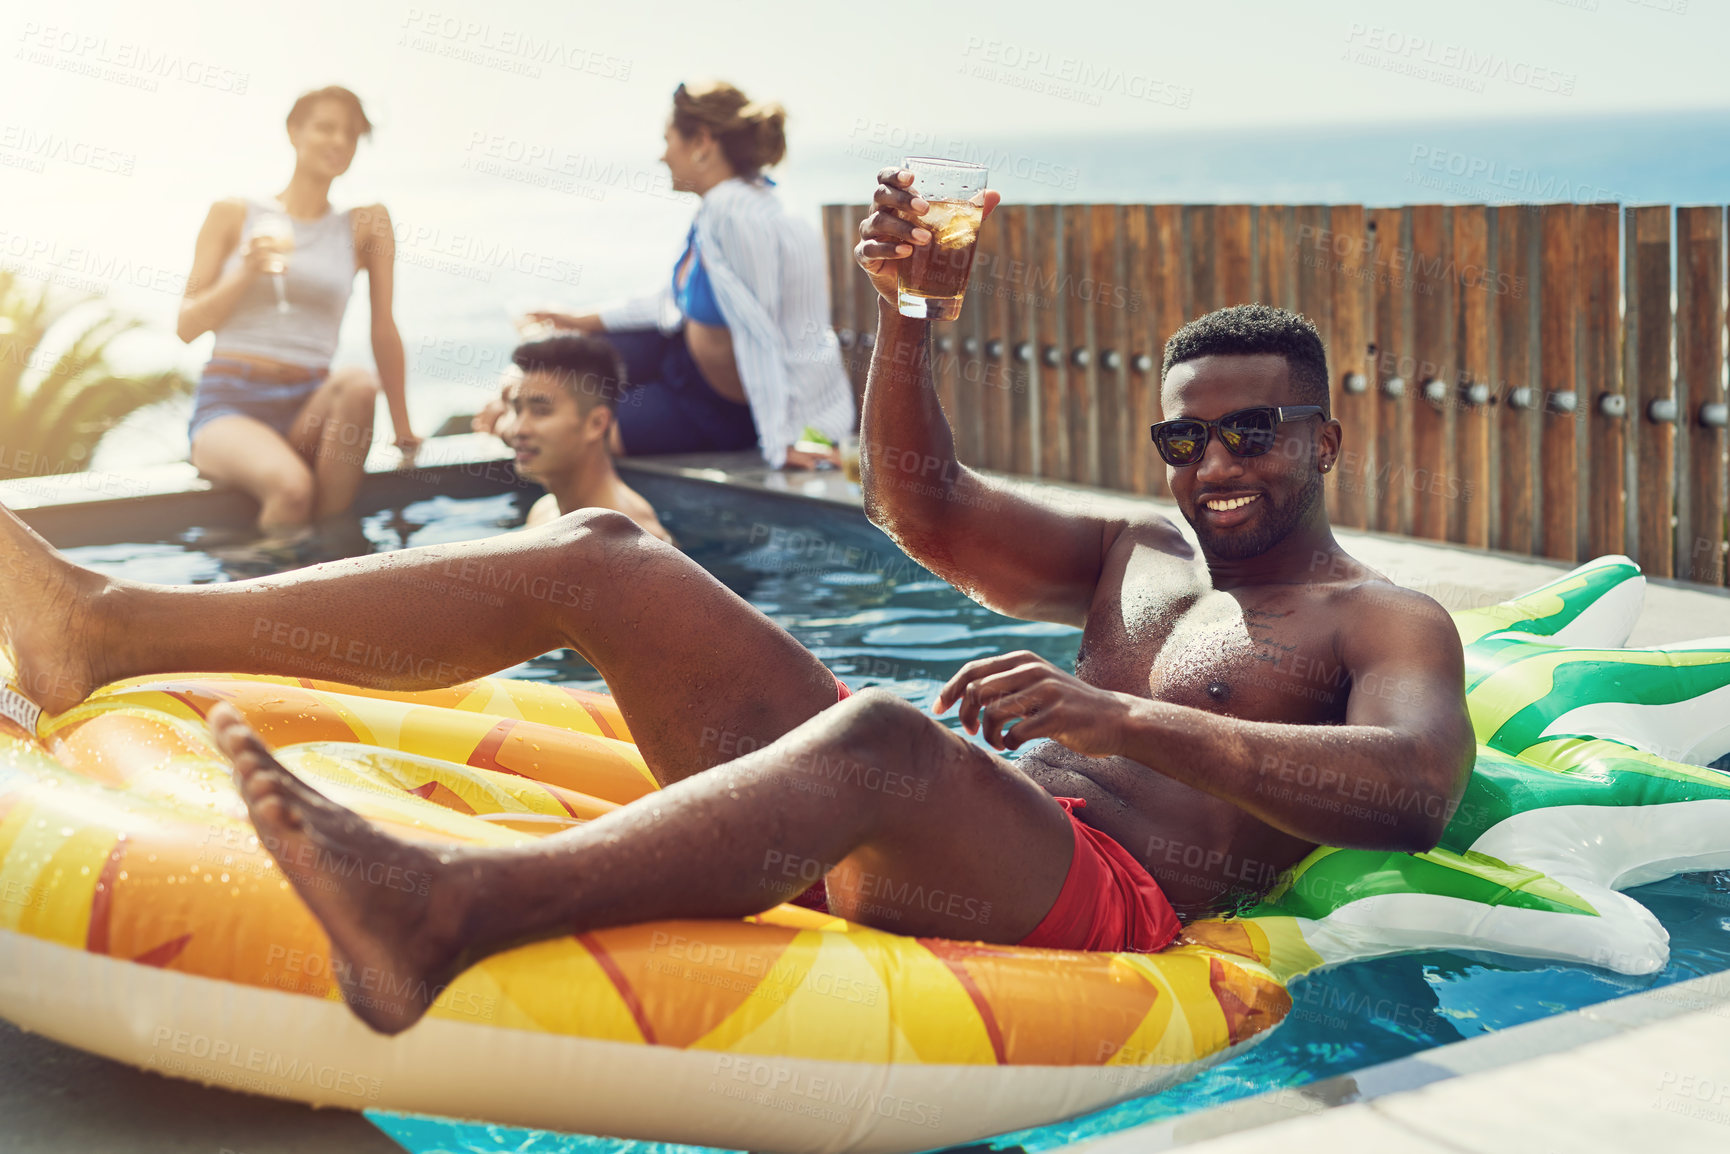 Buy stock photo Portrait of handsome young man raising up his glass for a toast while relaxing in a pool outdoors with friends